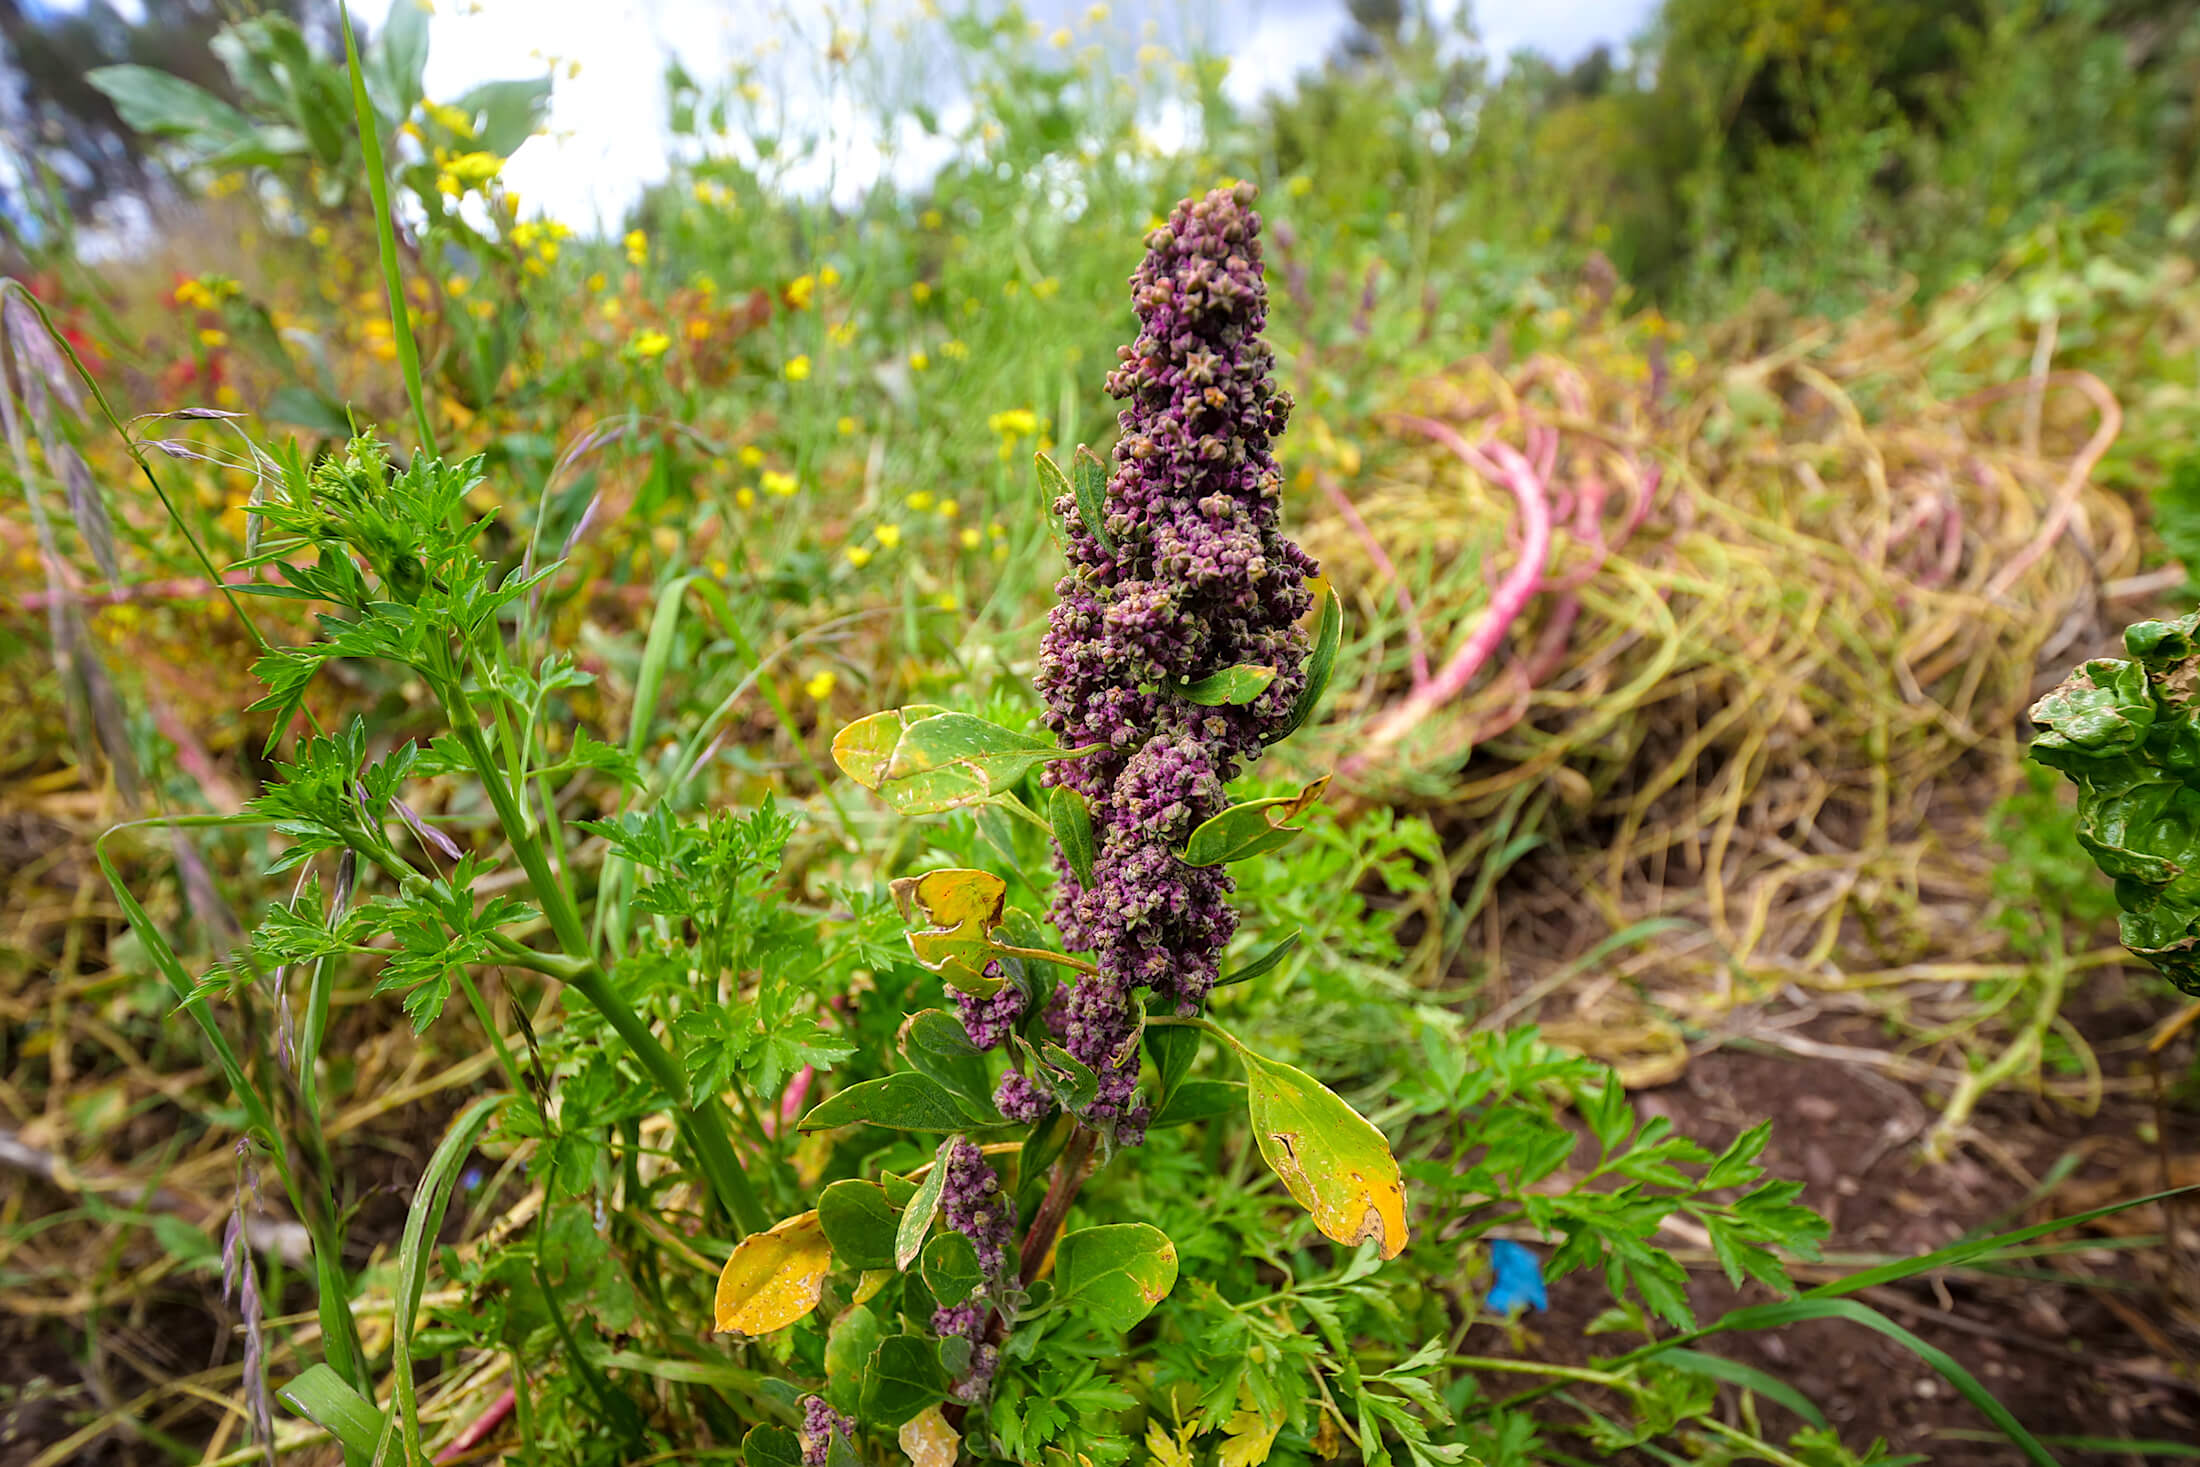 The flower of the Quinoa plant produces the cereal that we eat today